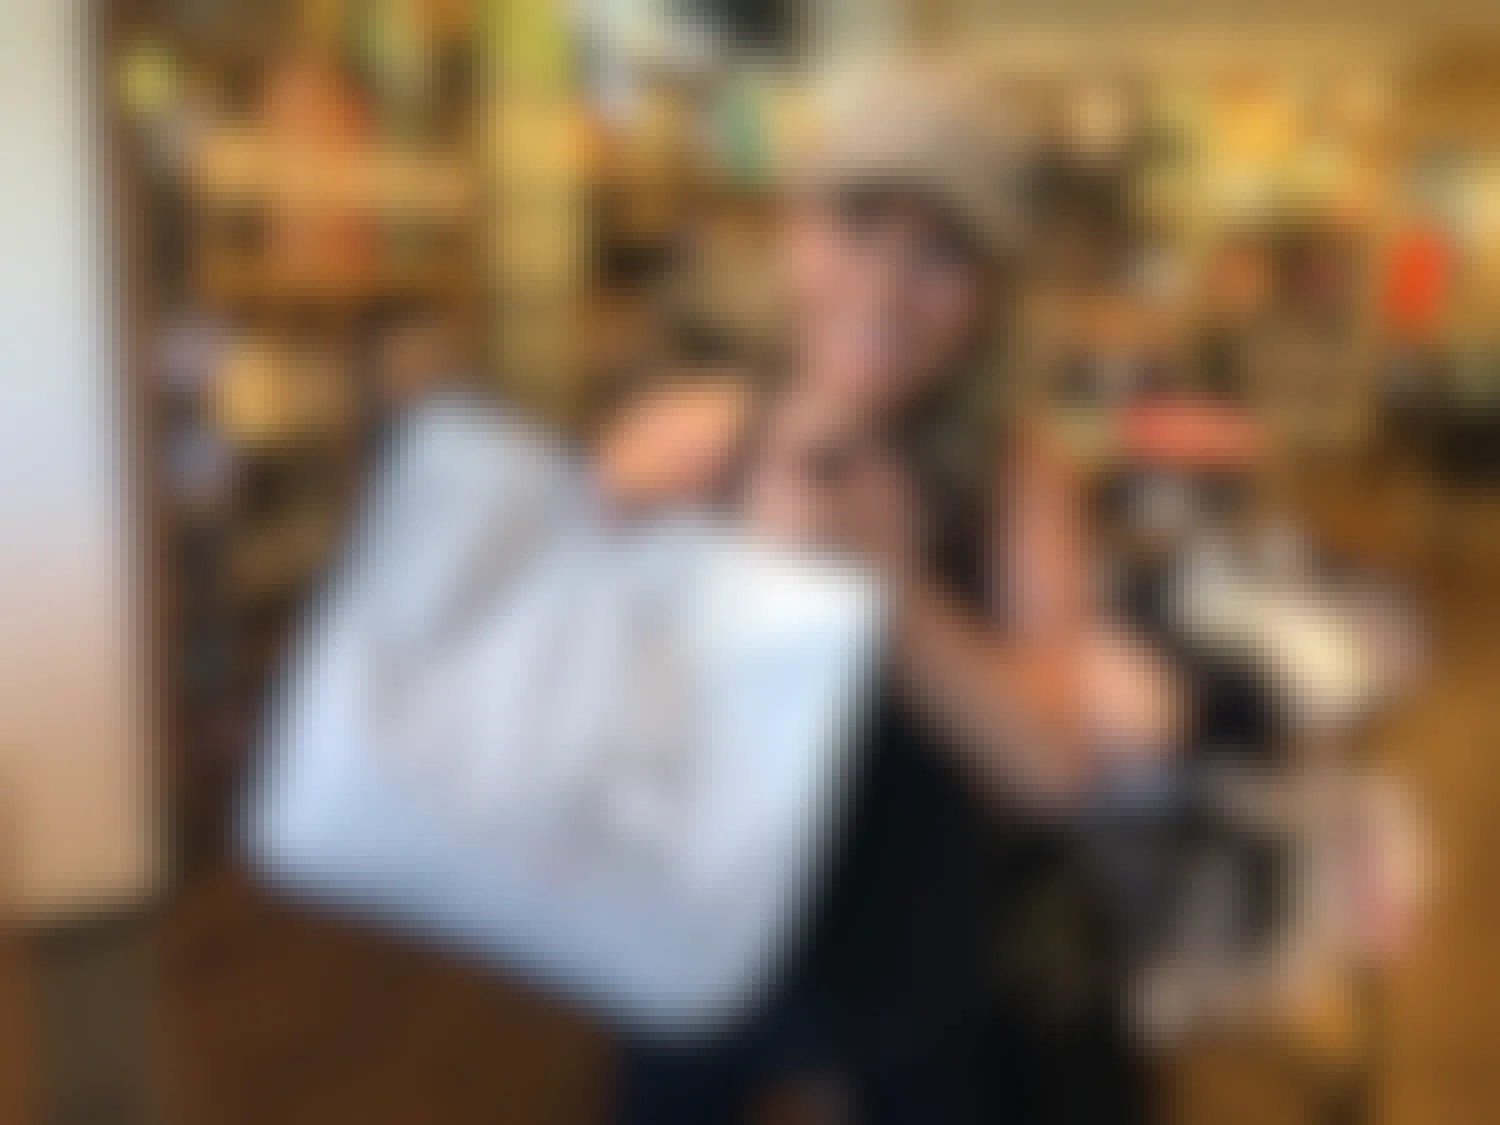 Woman holding up a Lululemon bag while smiling